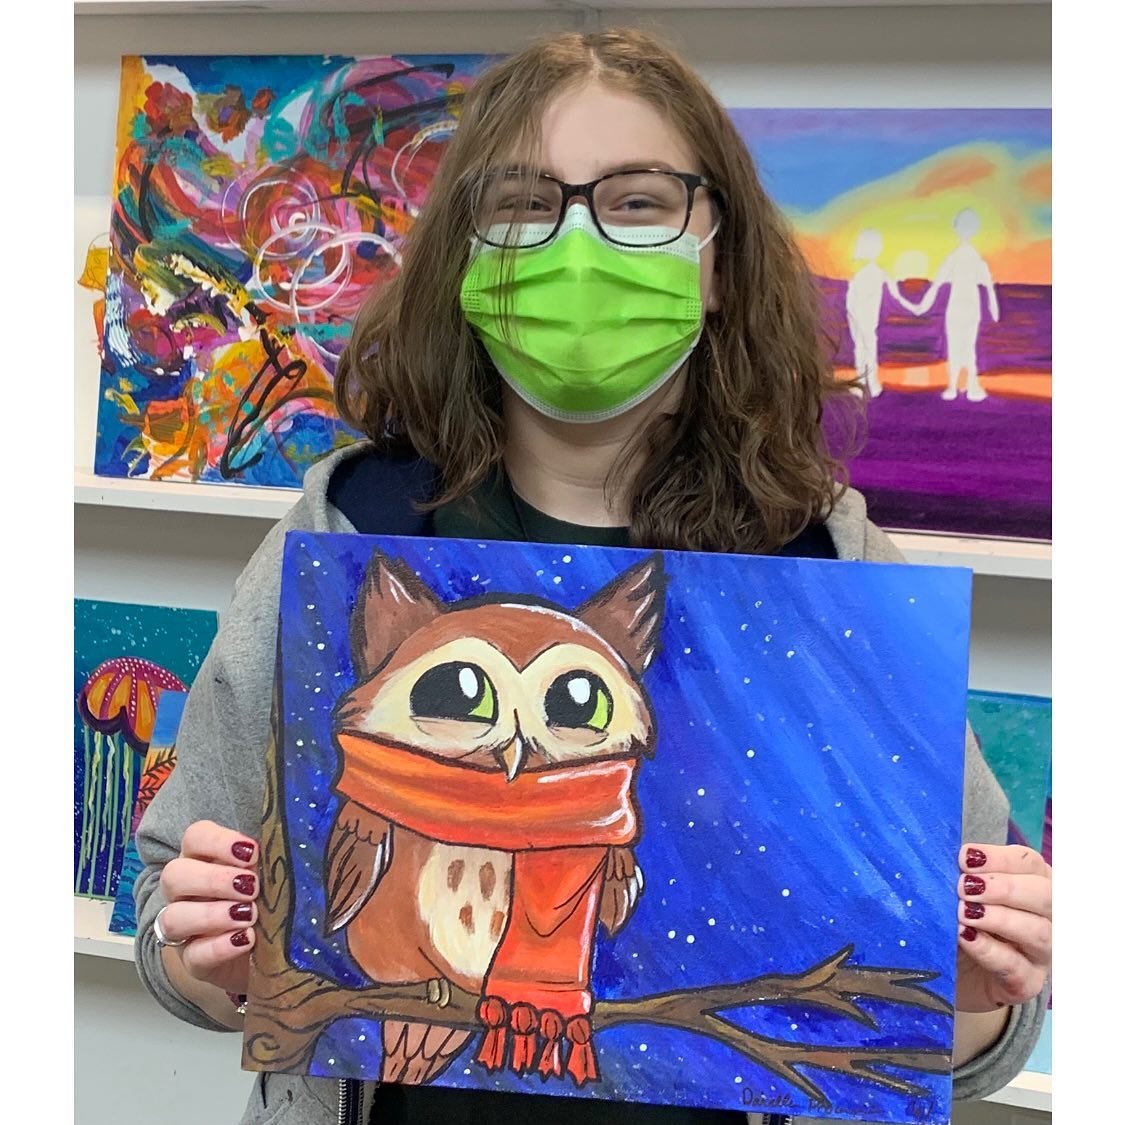 Daniella Procaccini, 15, with her canvas painting.